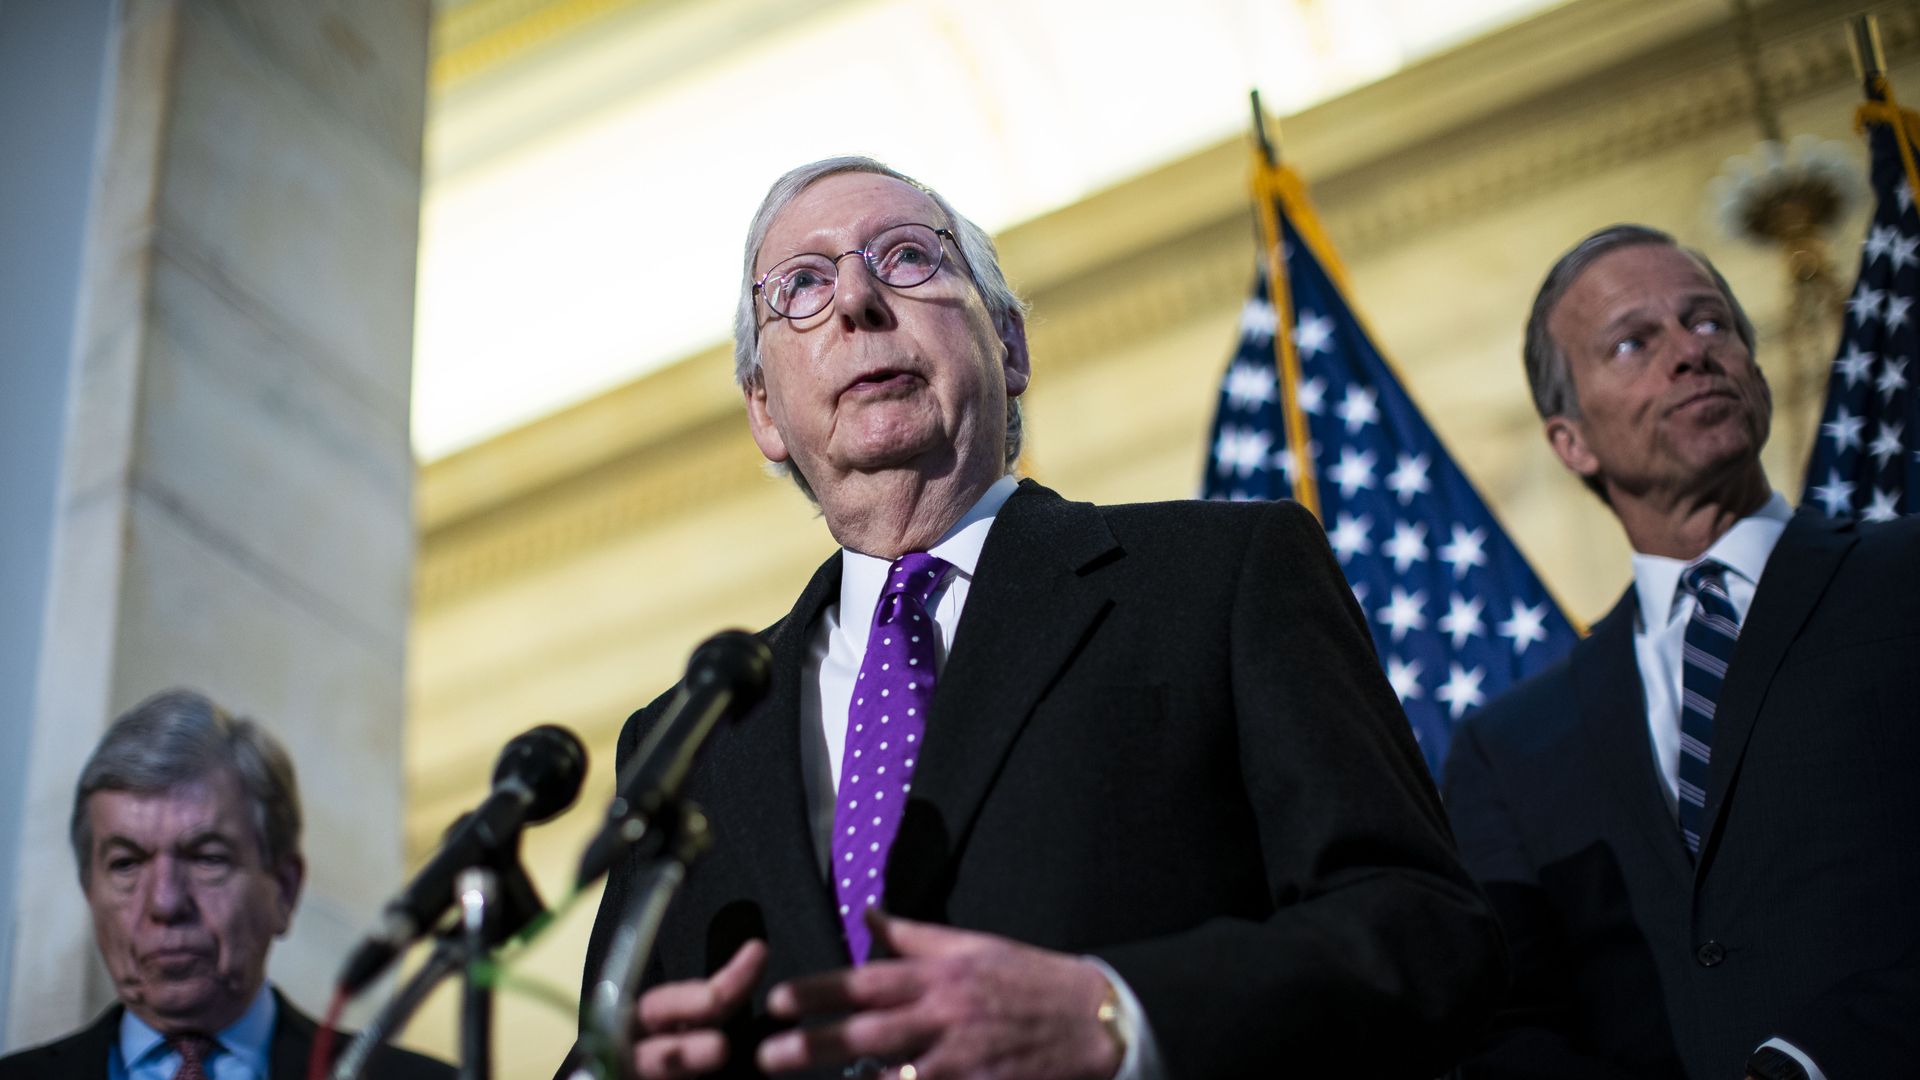 Senate Minority Leader Mitch McConnell speaks to members of the media during a news conference.